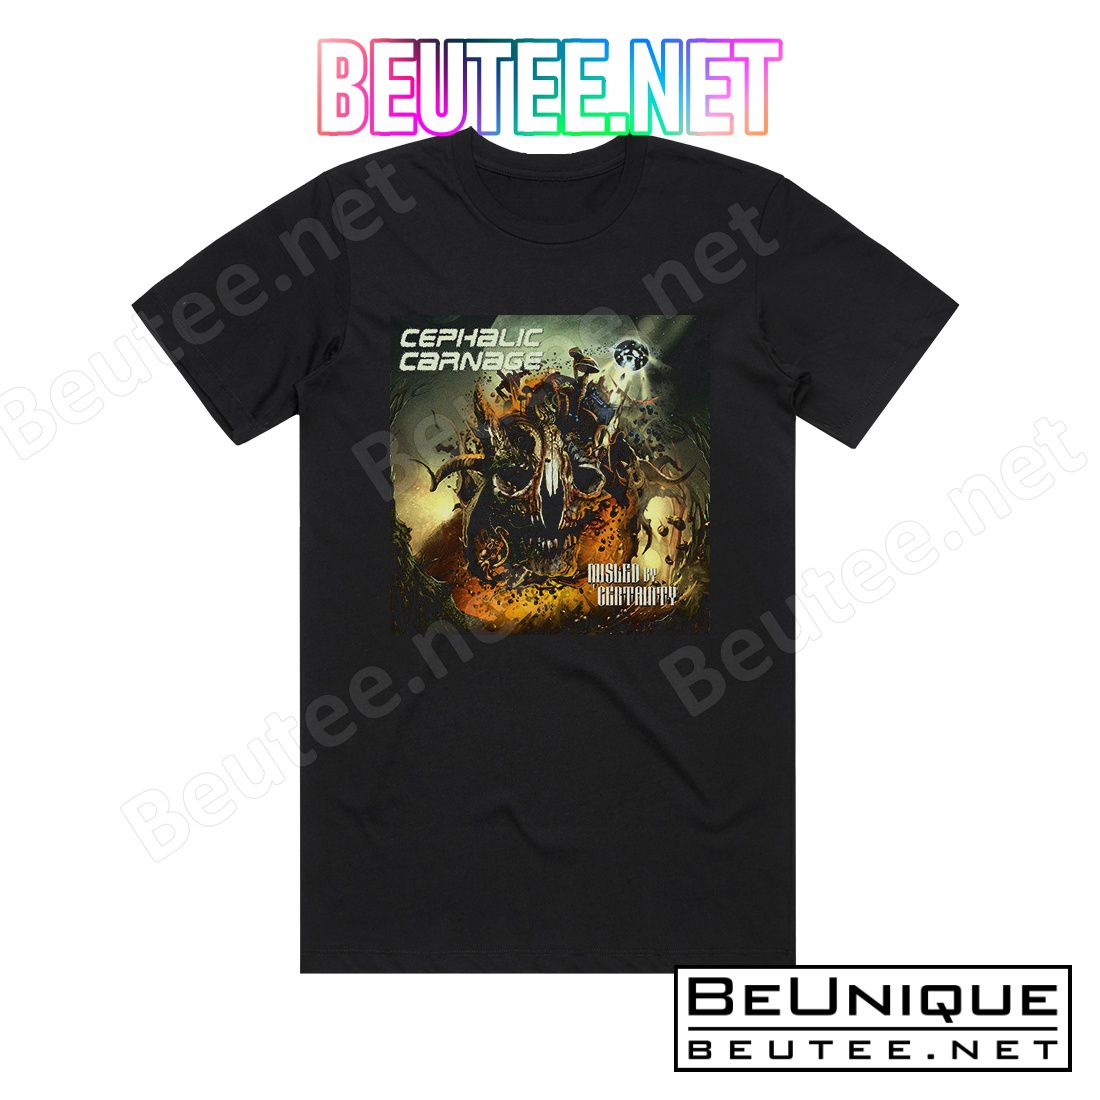 Cephalic Carnage Misled By Certainty Album Cover T-Shirt